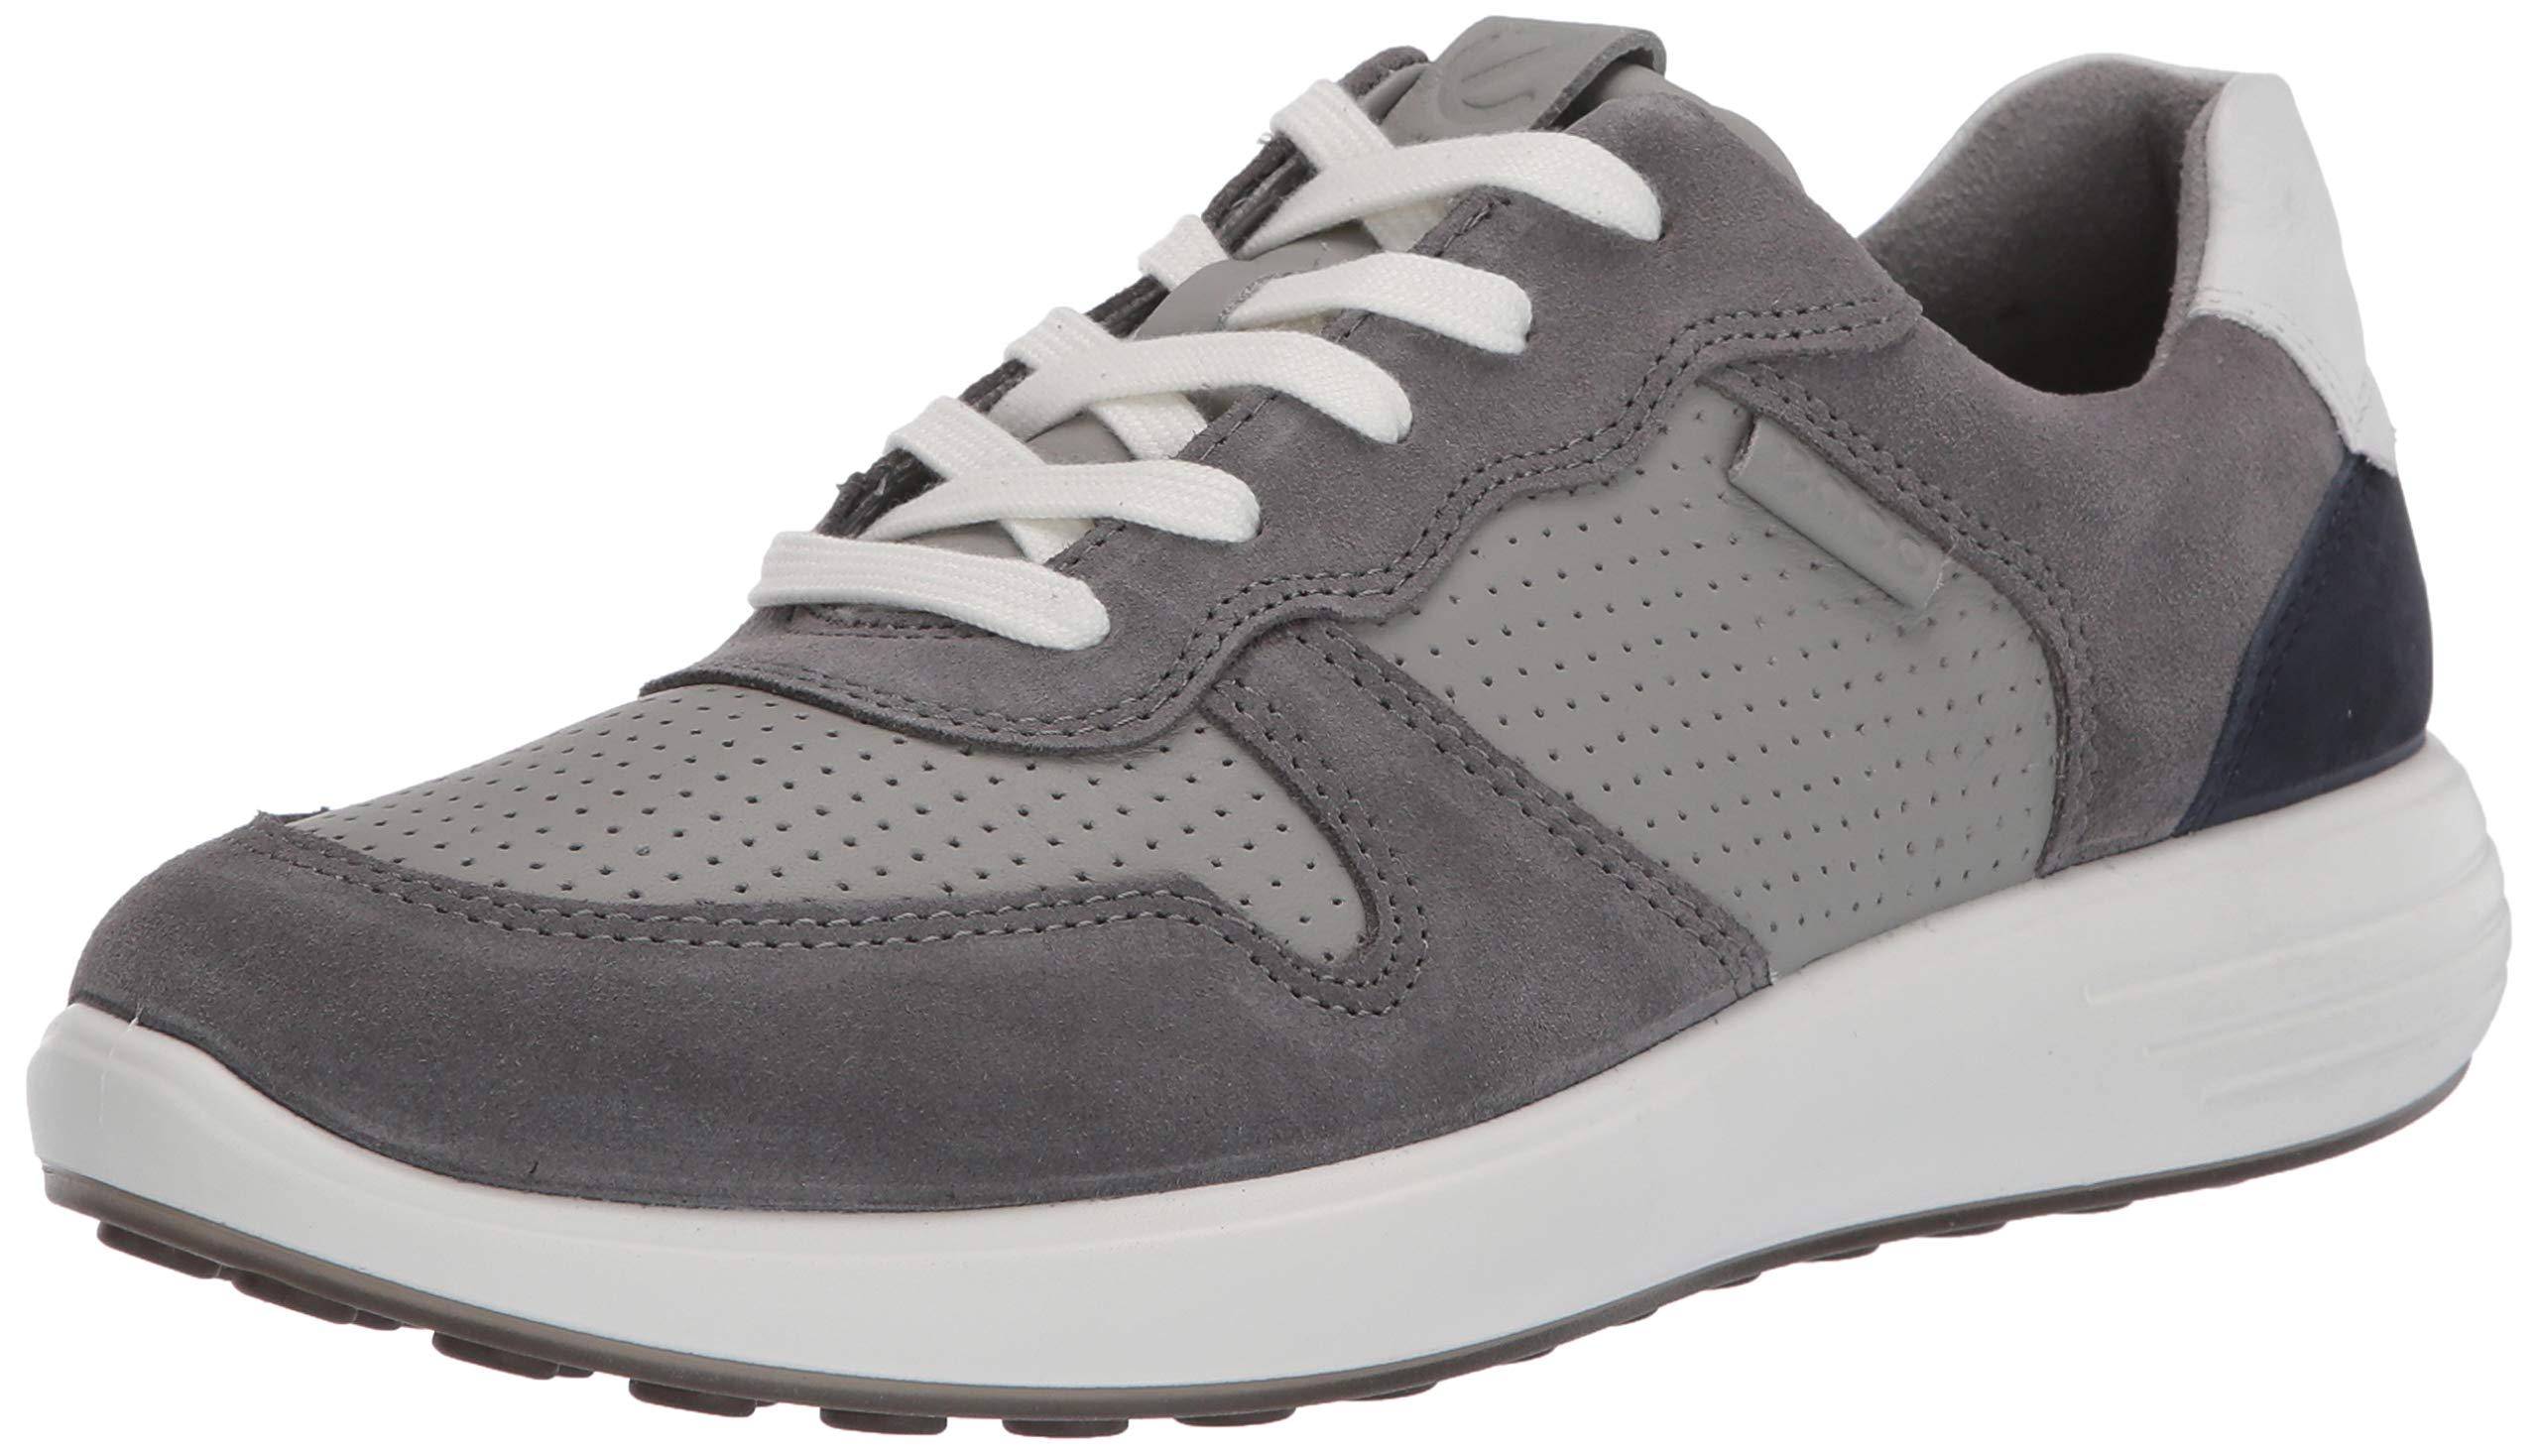 Ecco Leather Soft 7 Runner Retro Sneaker in Gray for Men - Save 20% - Lyst